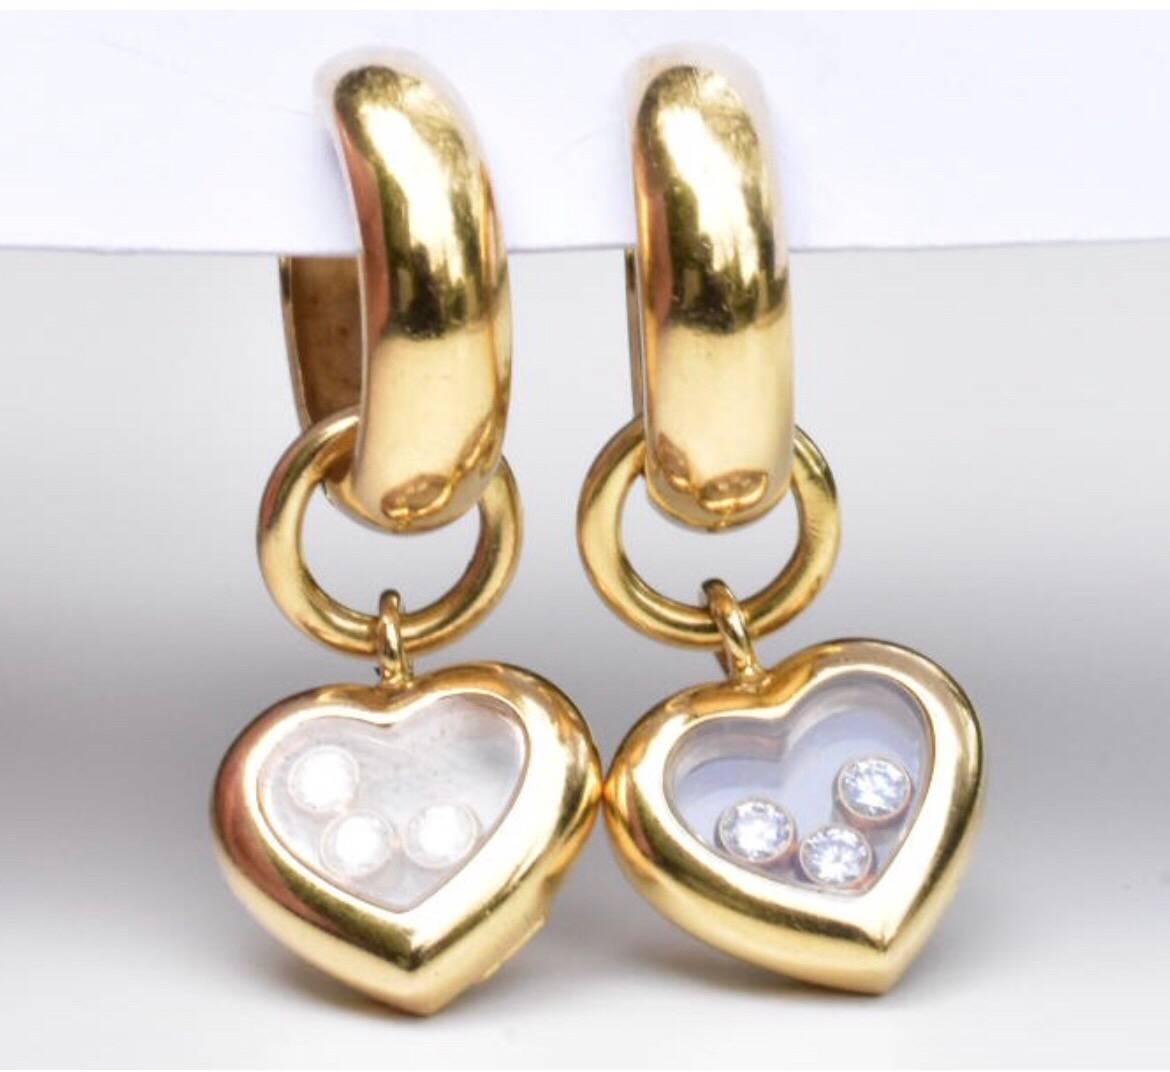 A pair of Chopard Happy Diamond earrings set in 18k. Each earring feature and heart drop pendant with three free moving diamonds set under a sapphire glass with glazed Chopard hallmark.

Hallmarks: Chopard, 750 LUC, glass frosted